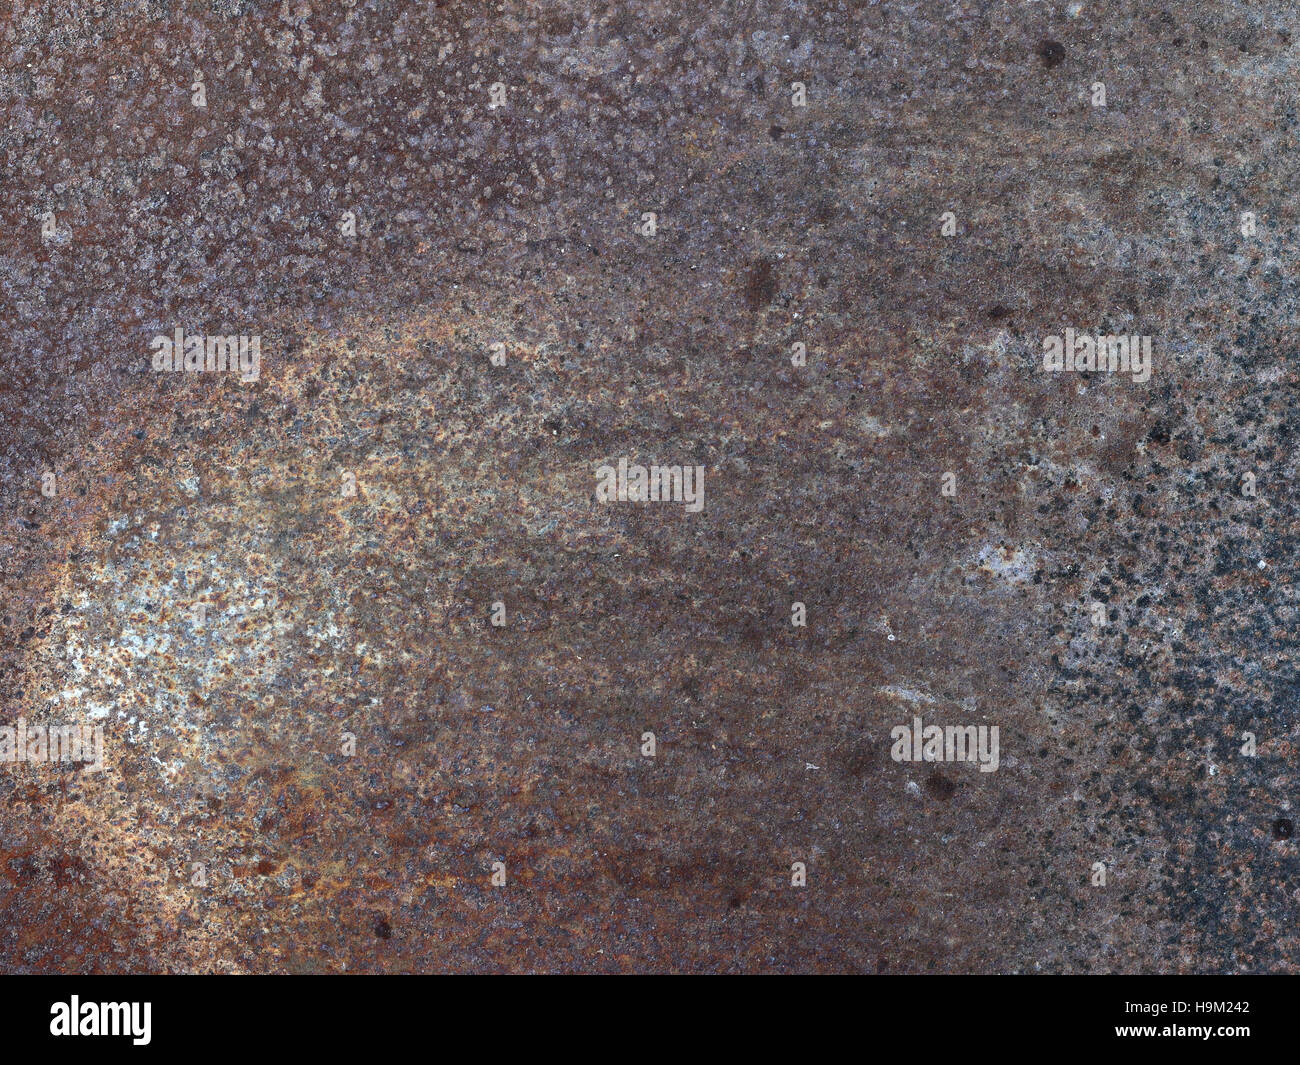 Rusty and worn surface of the iron plate Stock Photo